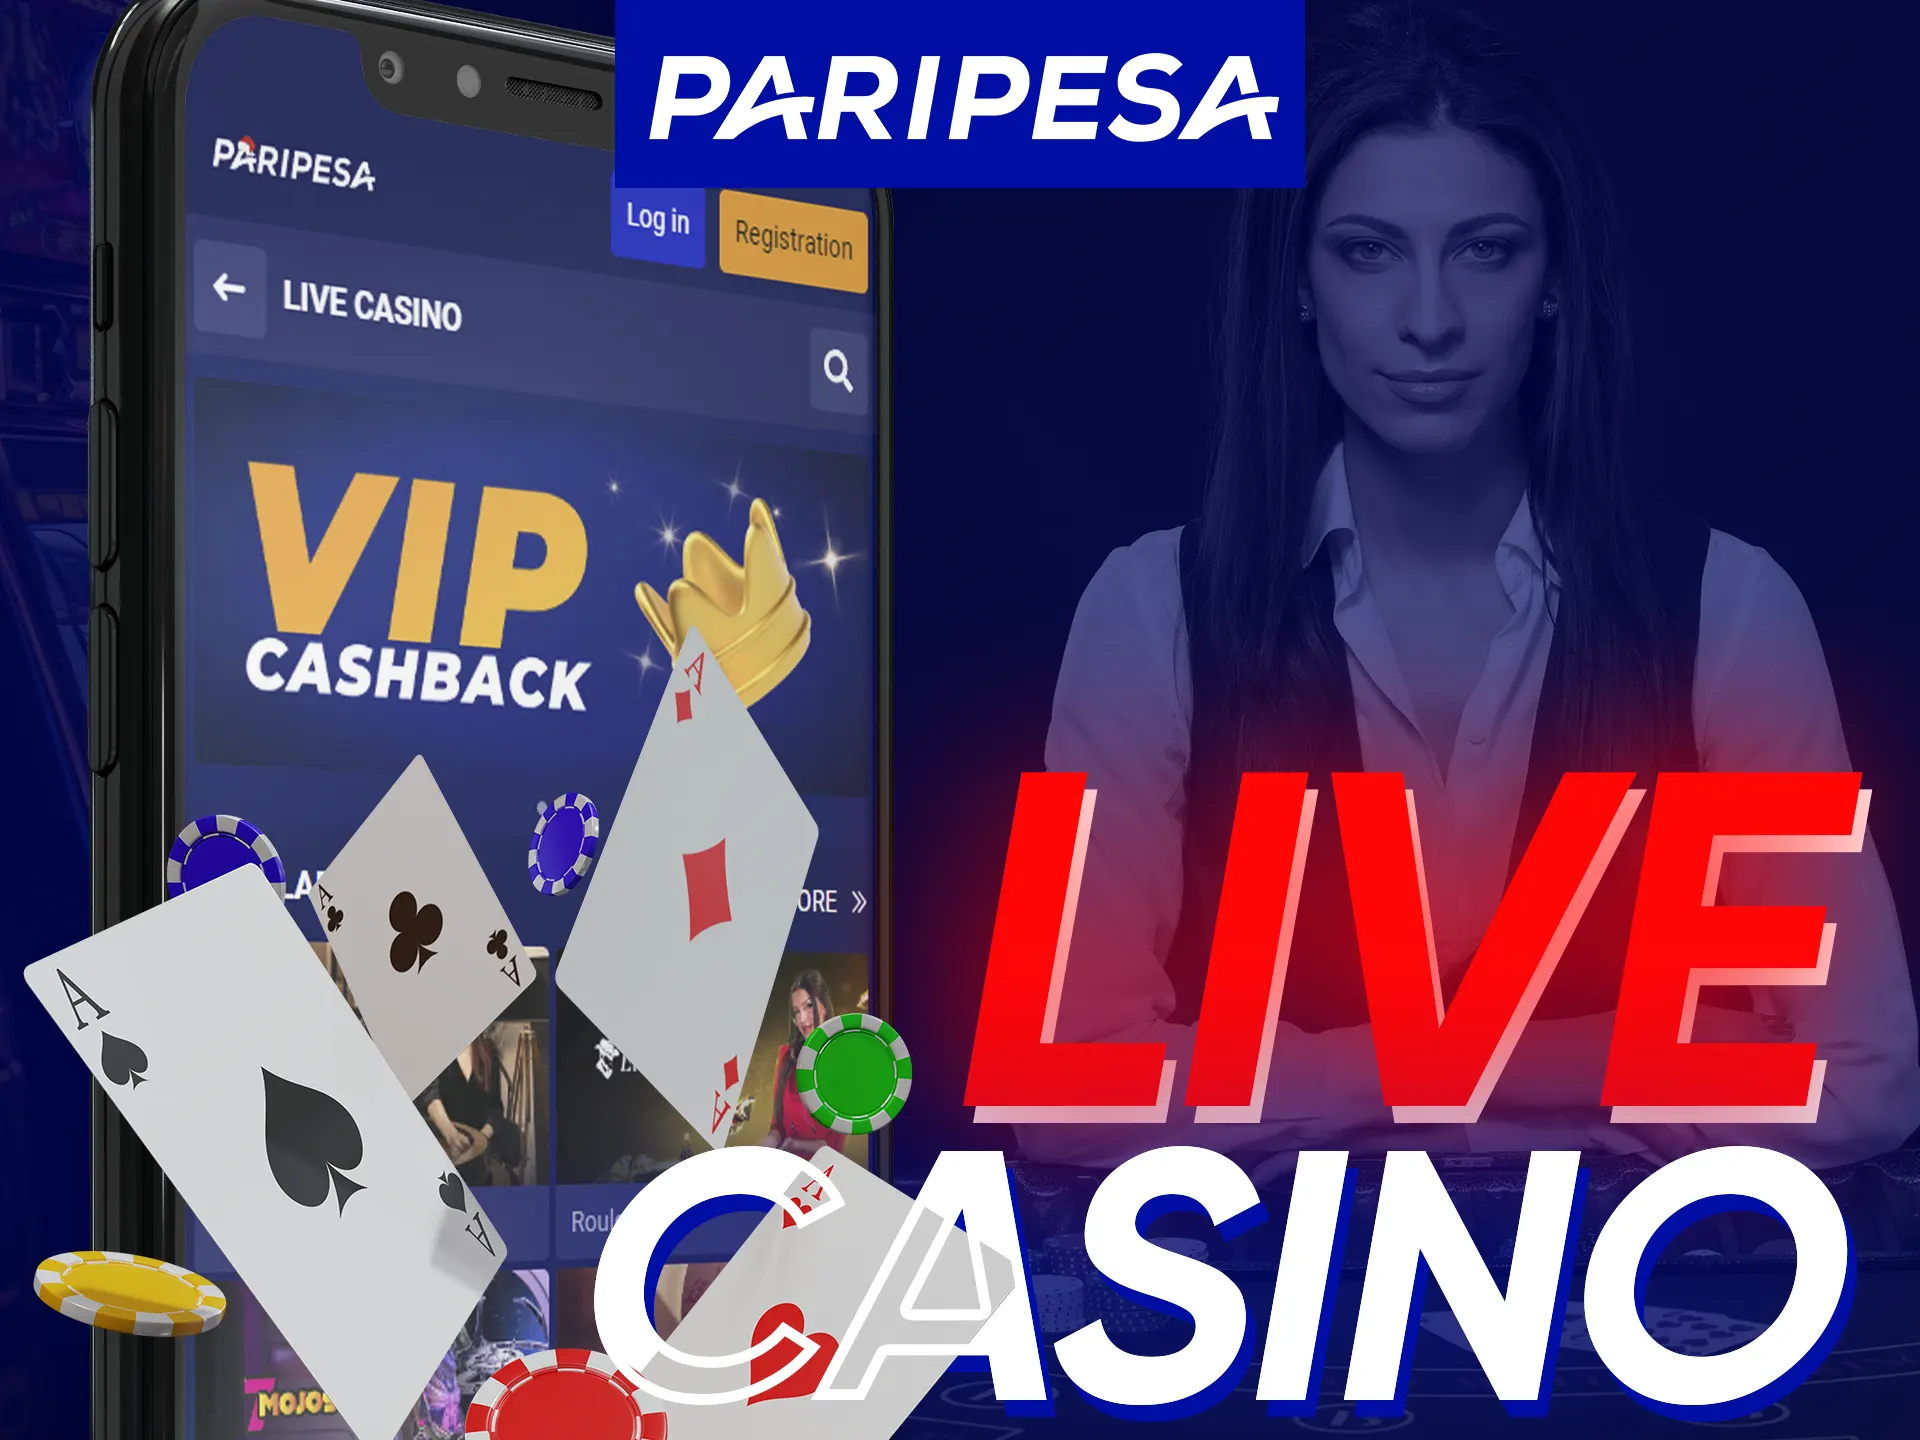 Enjoy the most popular live dealer games with Live Casino section at Paripesa.